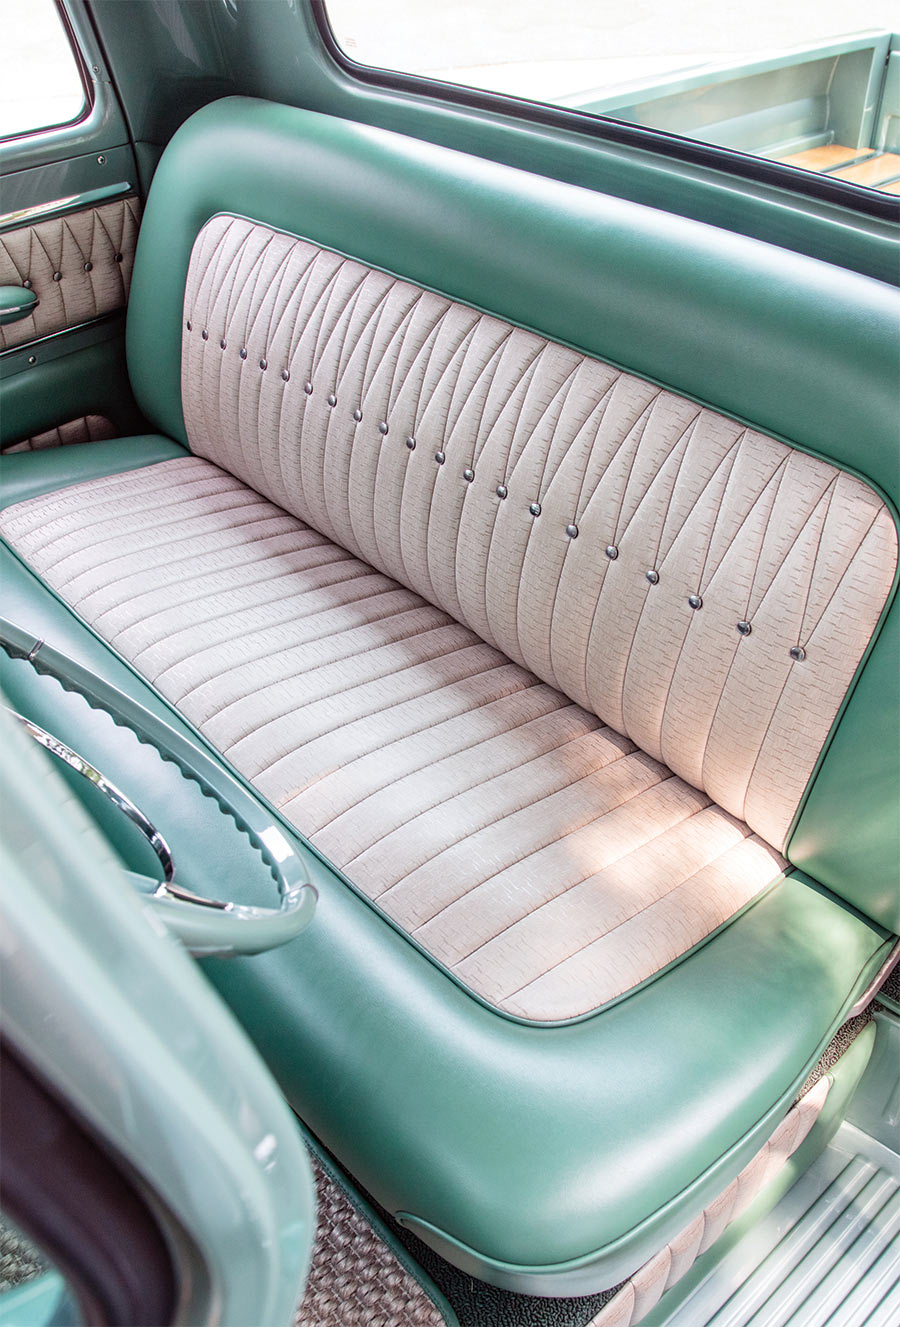 interior view of 1959 Chevy Apache front seats